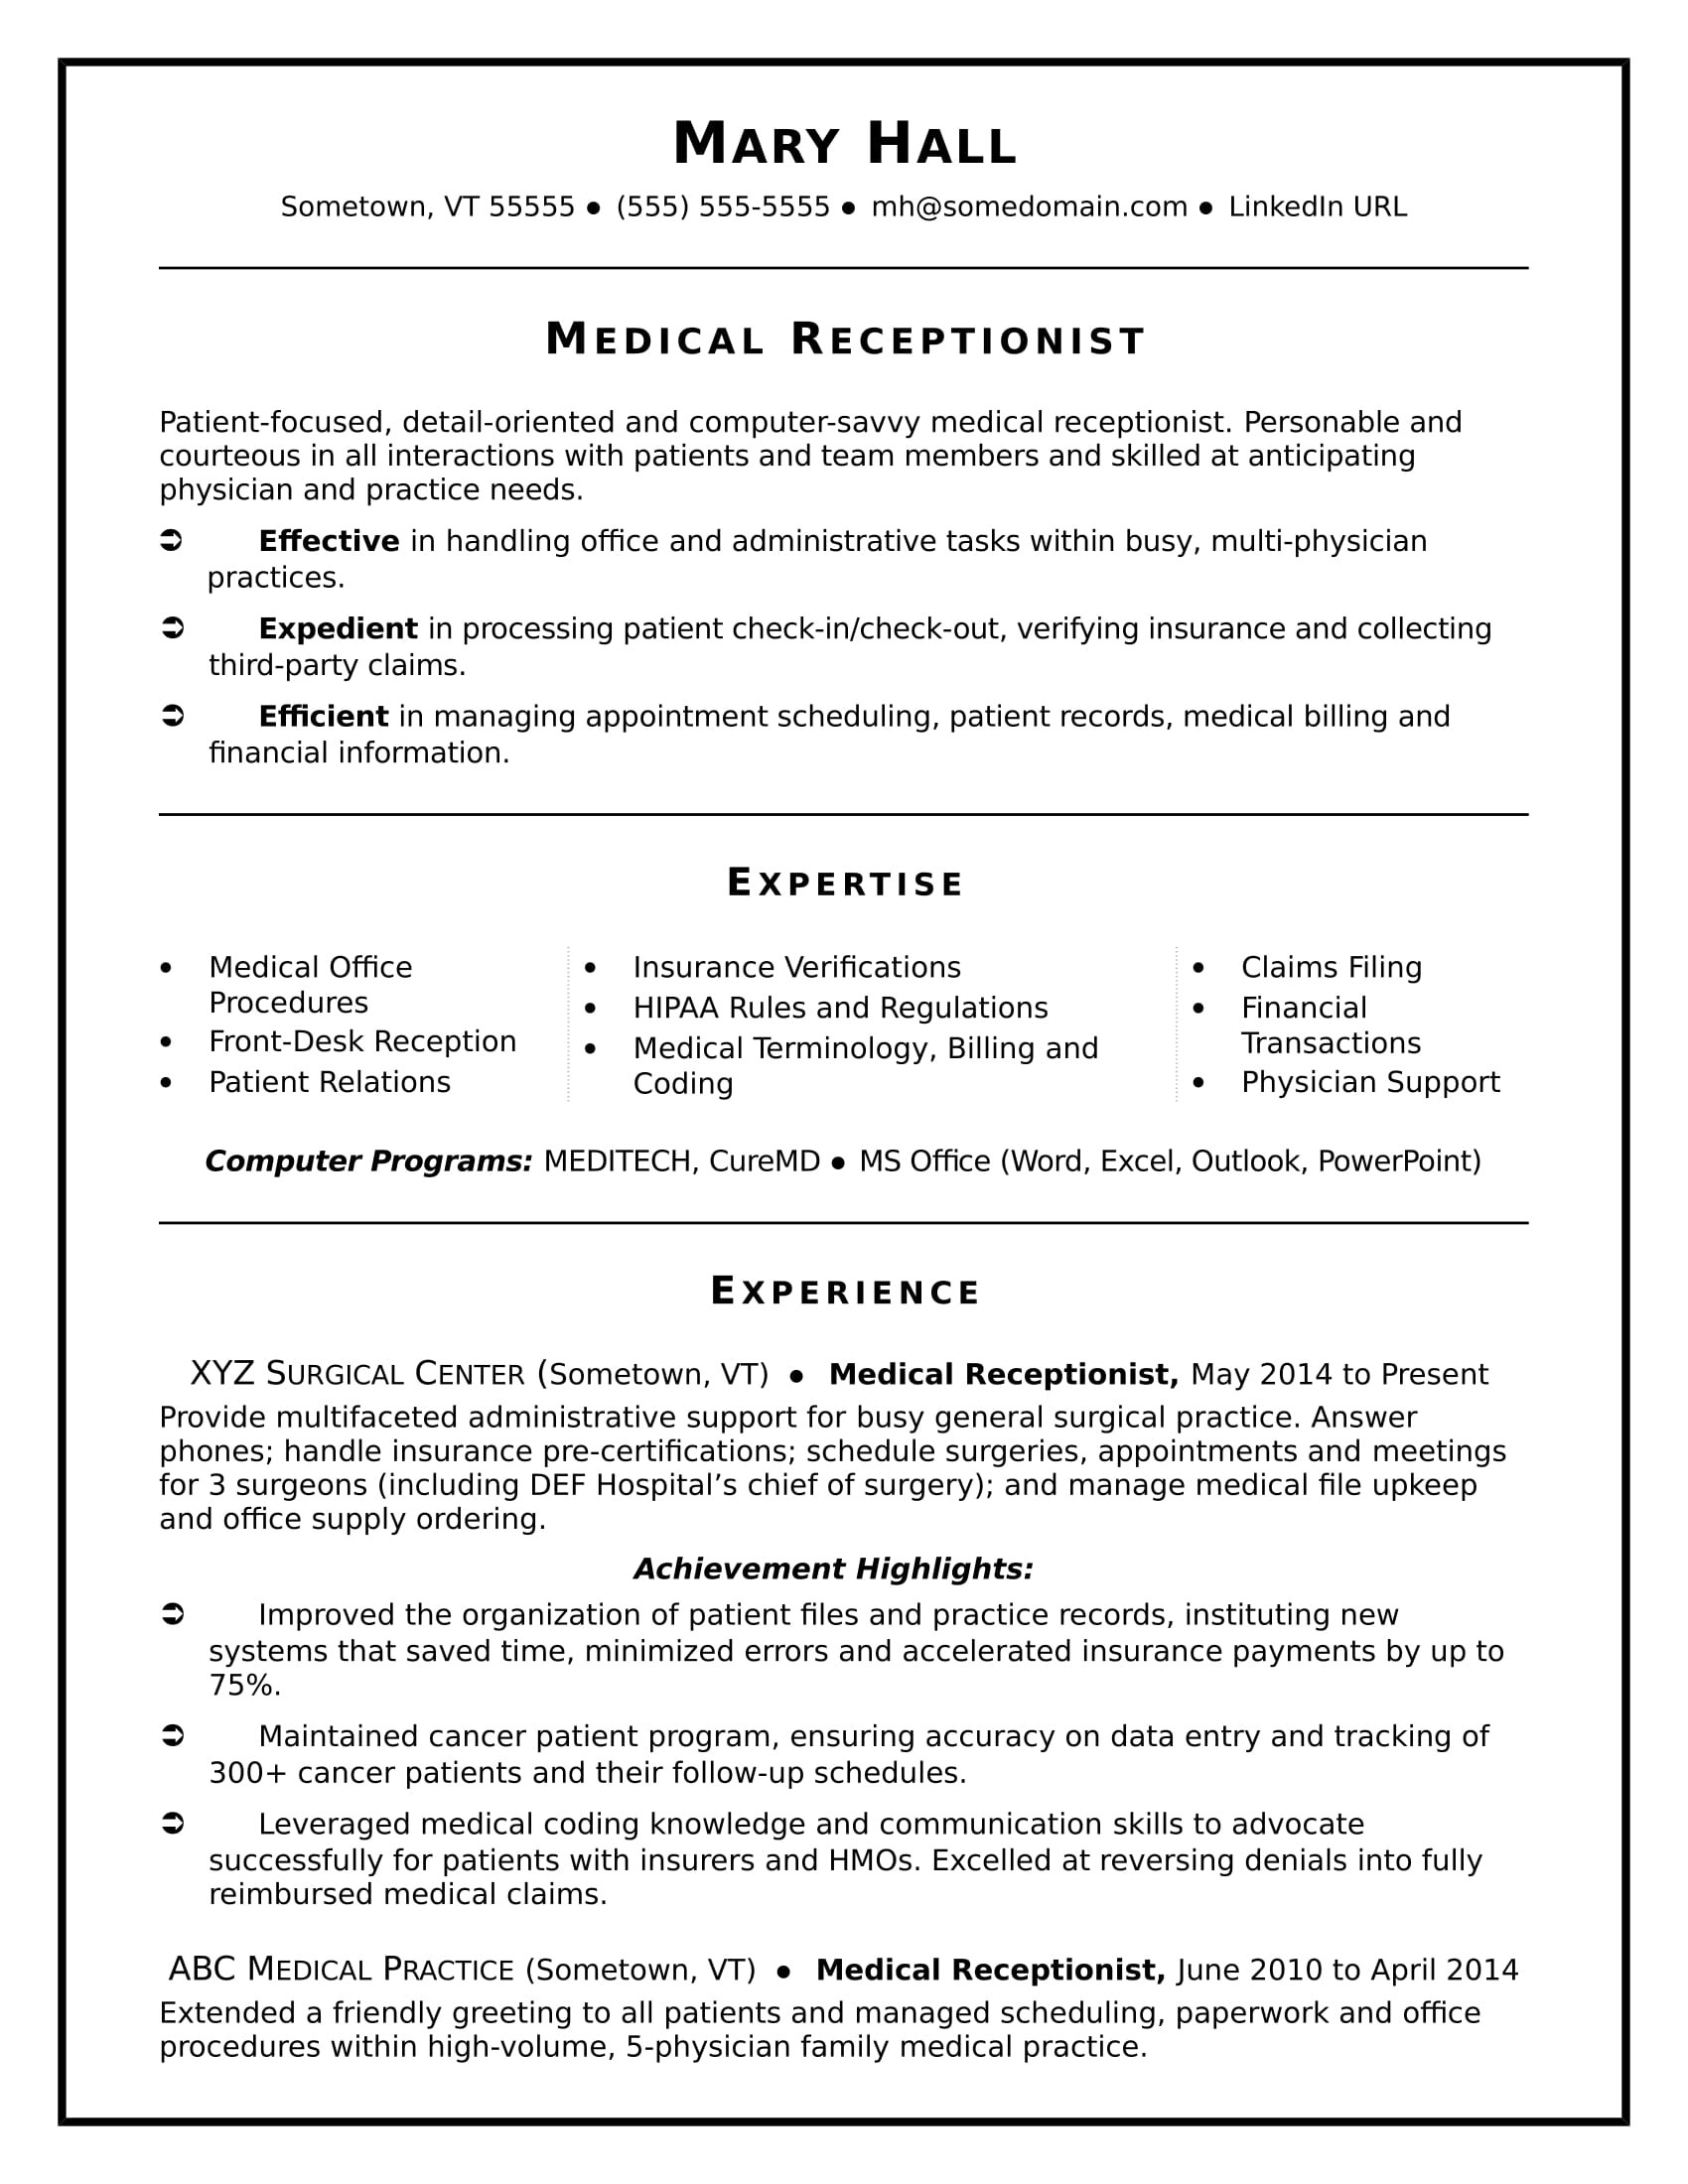 Sample Resumes for Receptionist In Medical Offices Medical Receptionist Resume Sample Monster.com